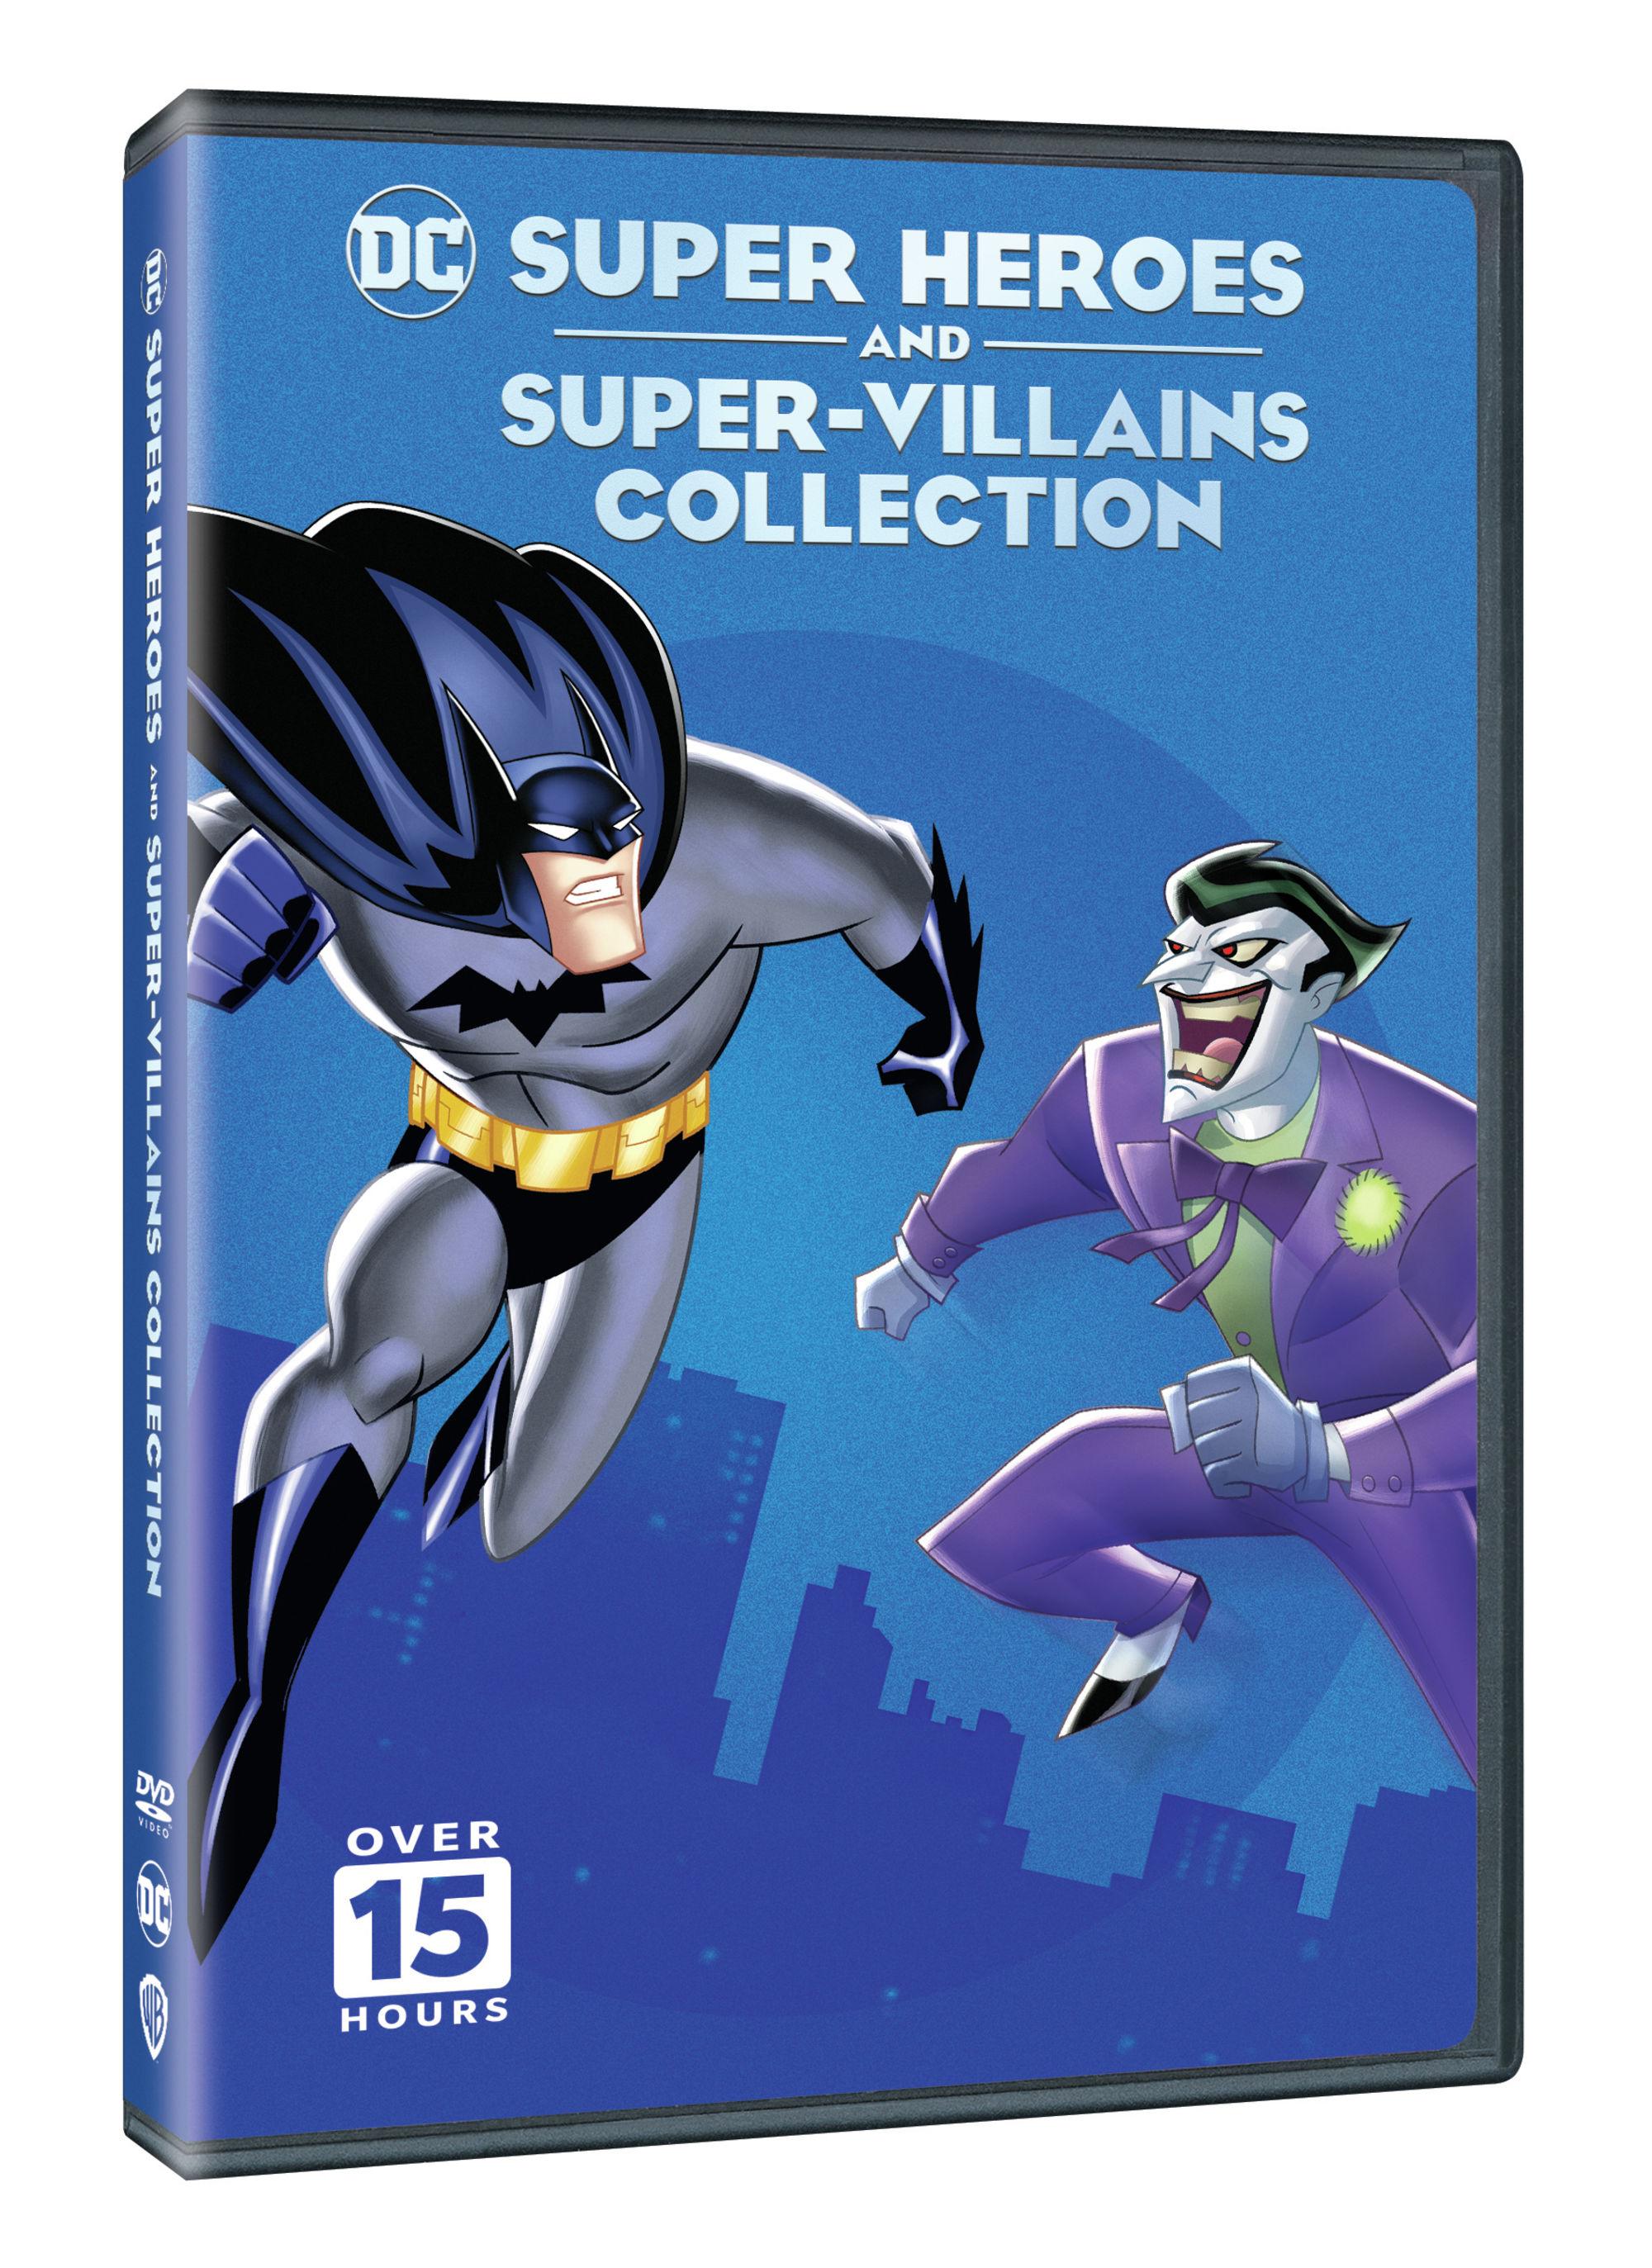 DC Super-Heroes and Super-Villains Collection